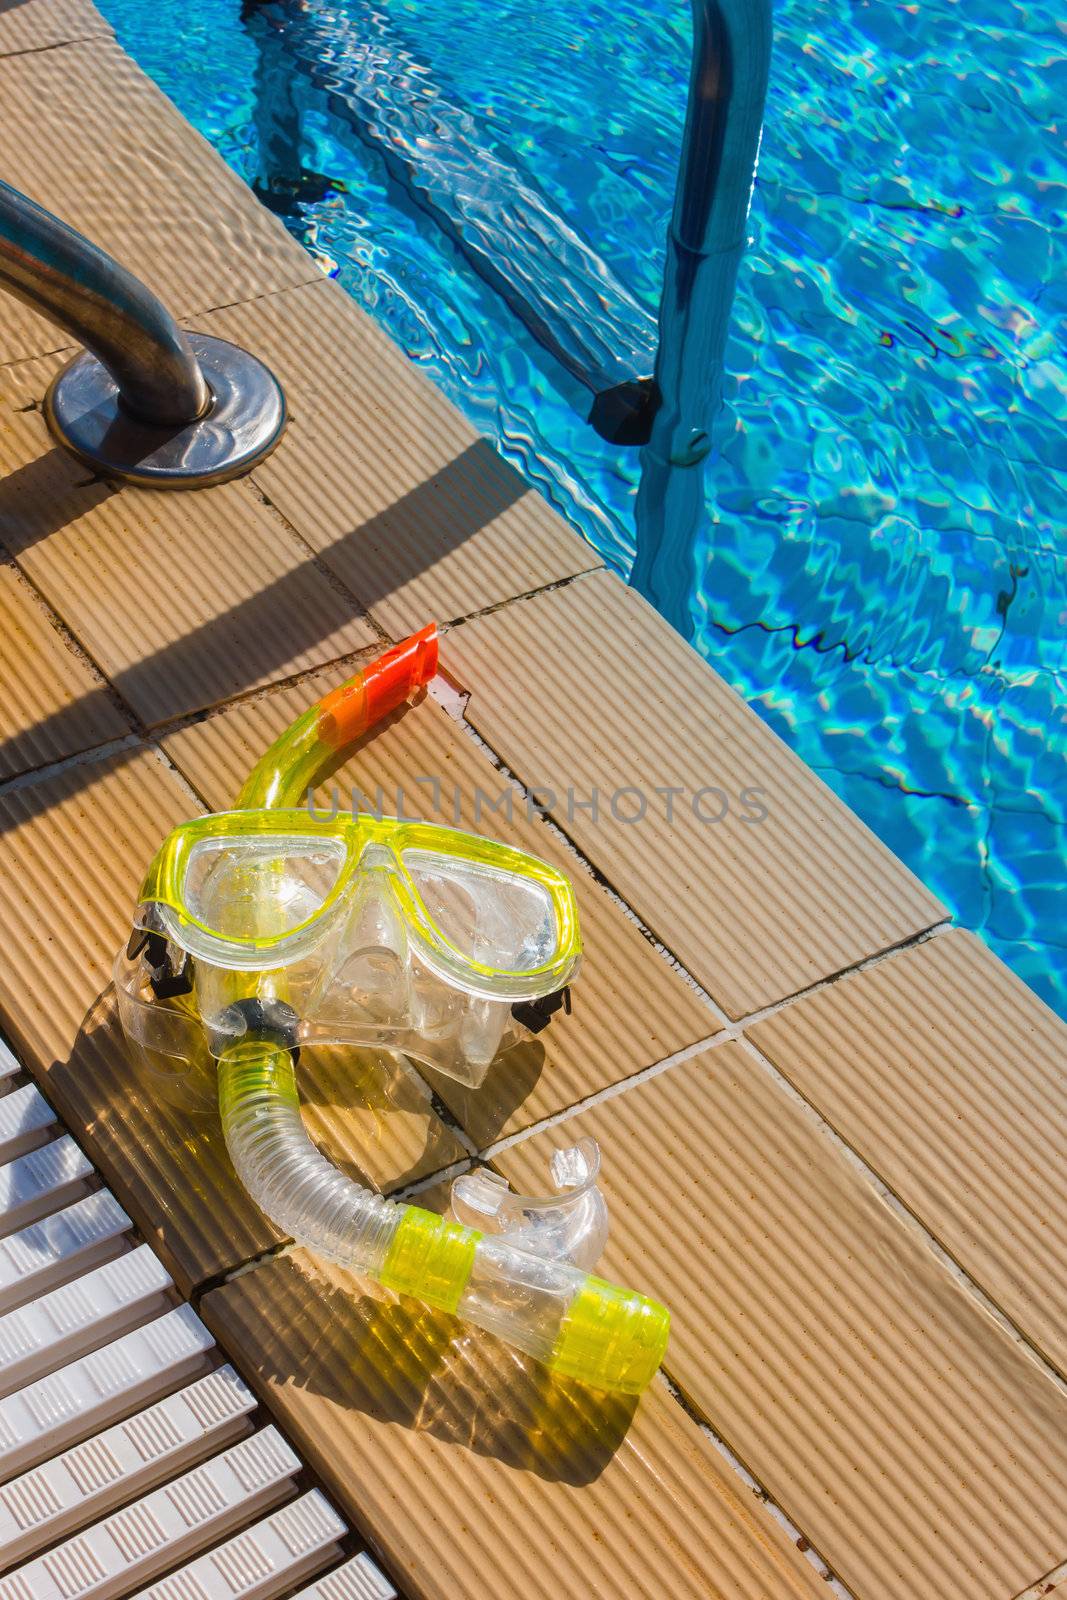 Mask and snorkel for diving near the pool by oleg_zhukov